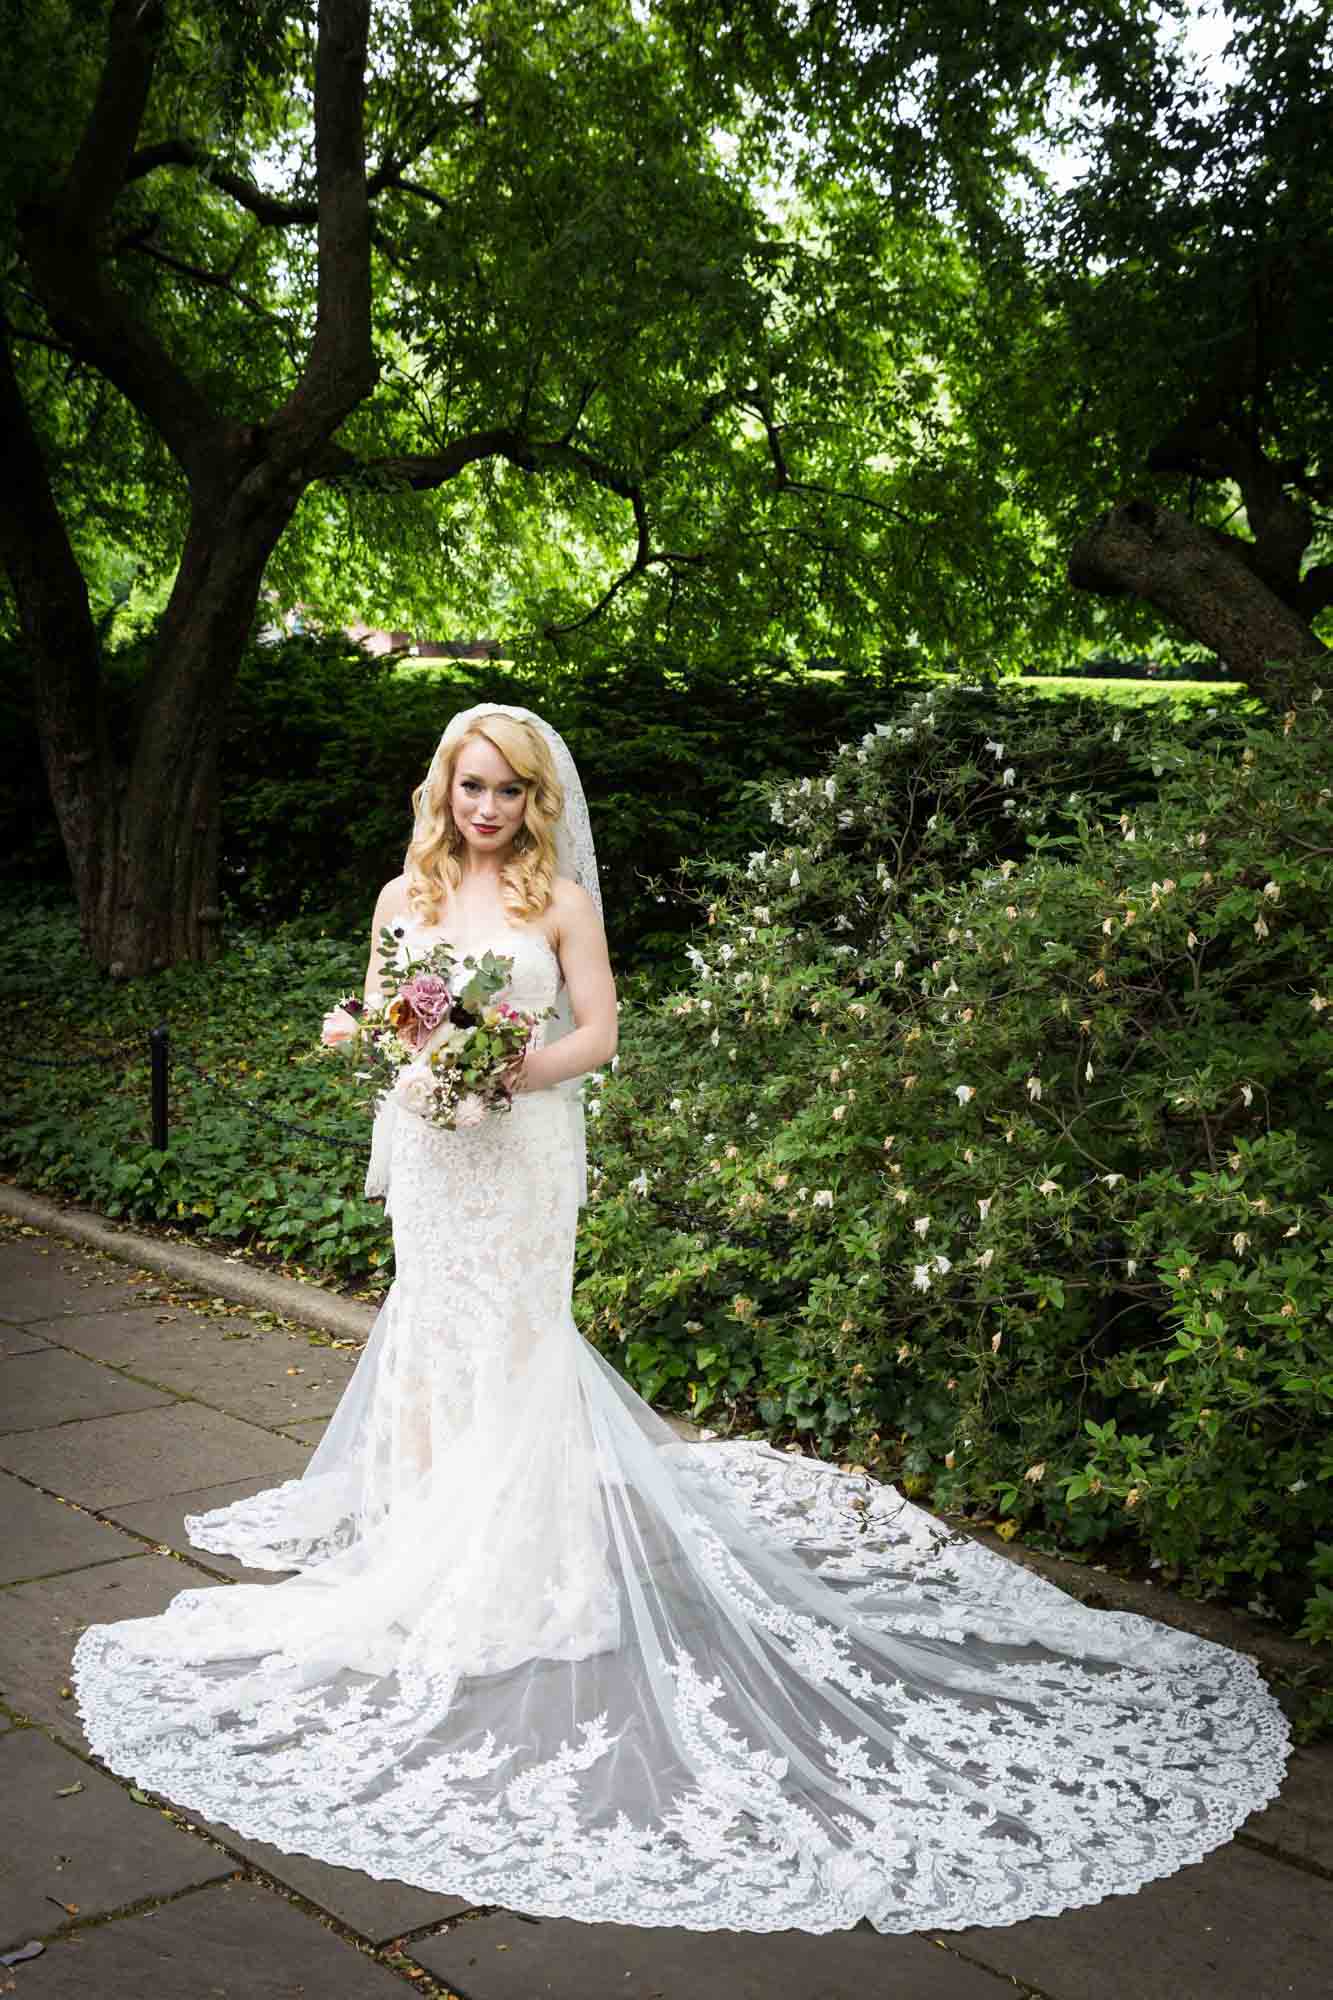 Bride wearing dress with long train in Central Park